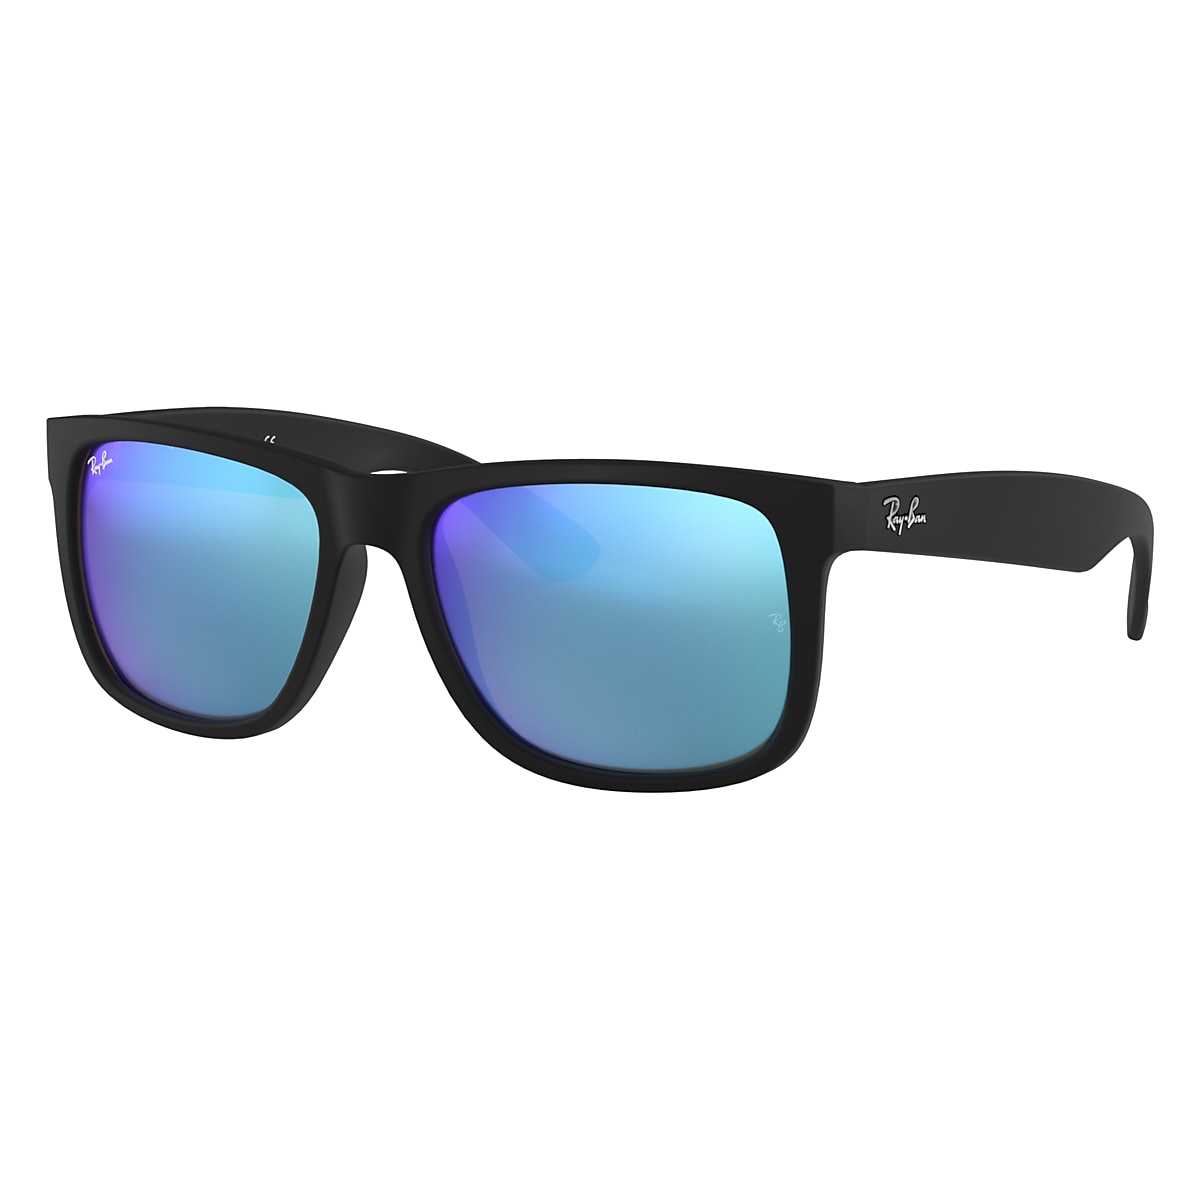 JUSTIN COLOR MIX Sunglasses in Black and Blue - RB4165F | Ray 